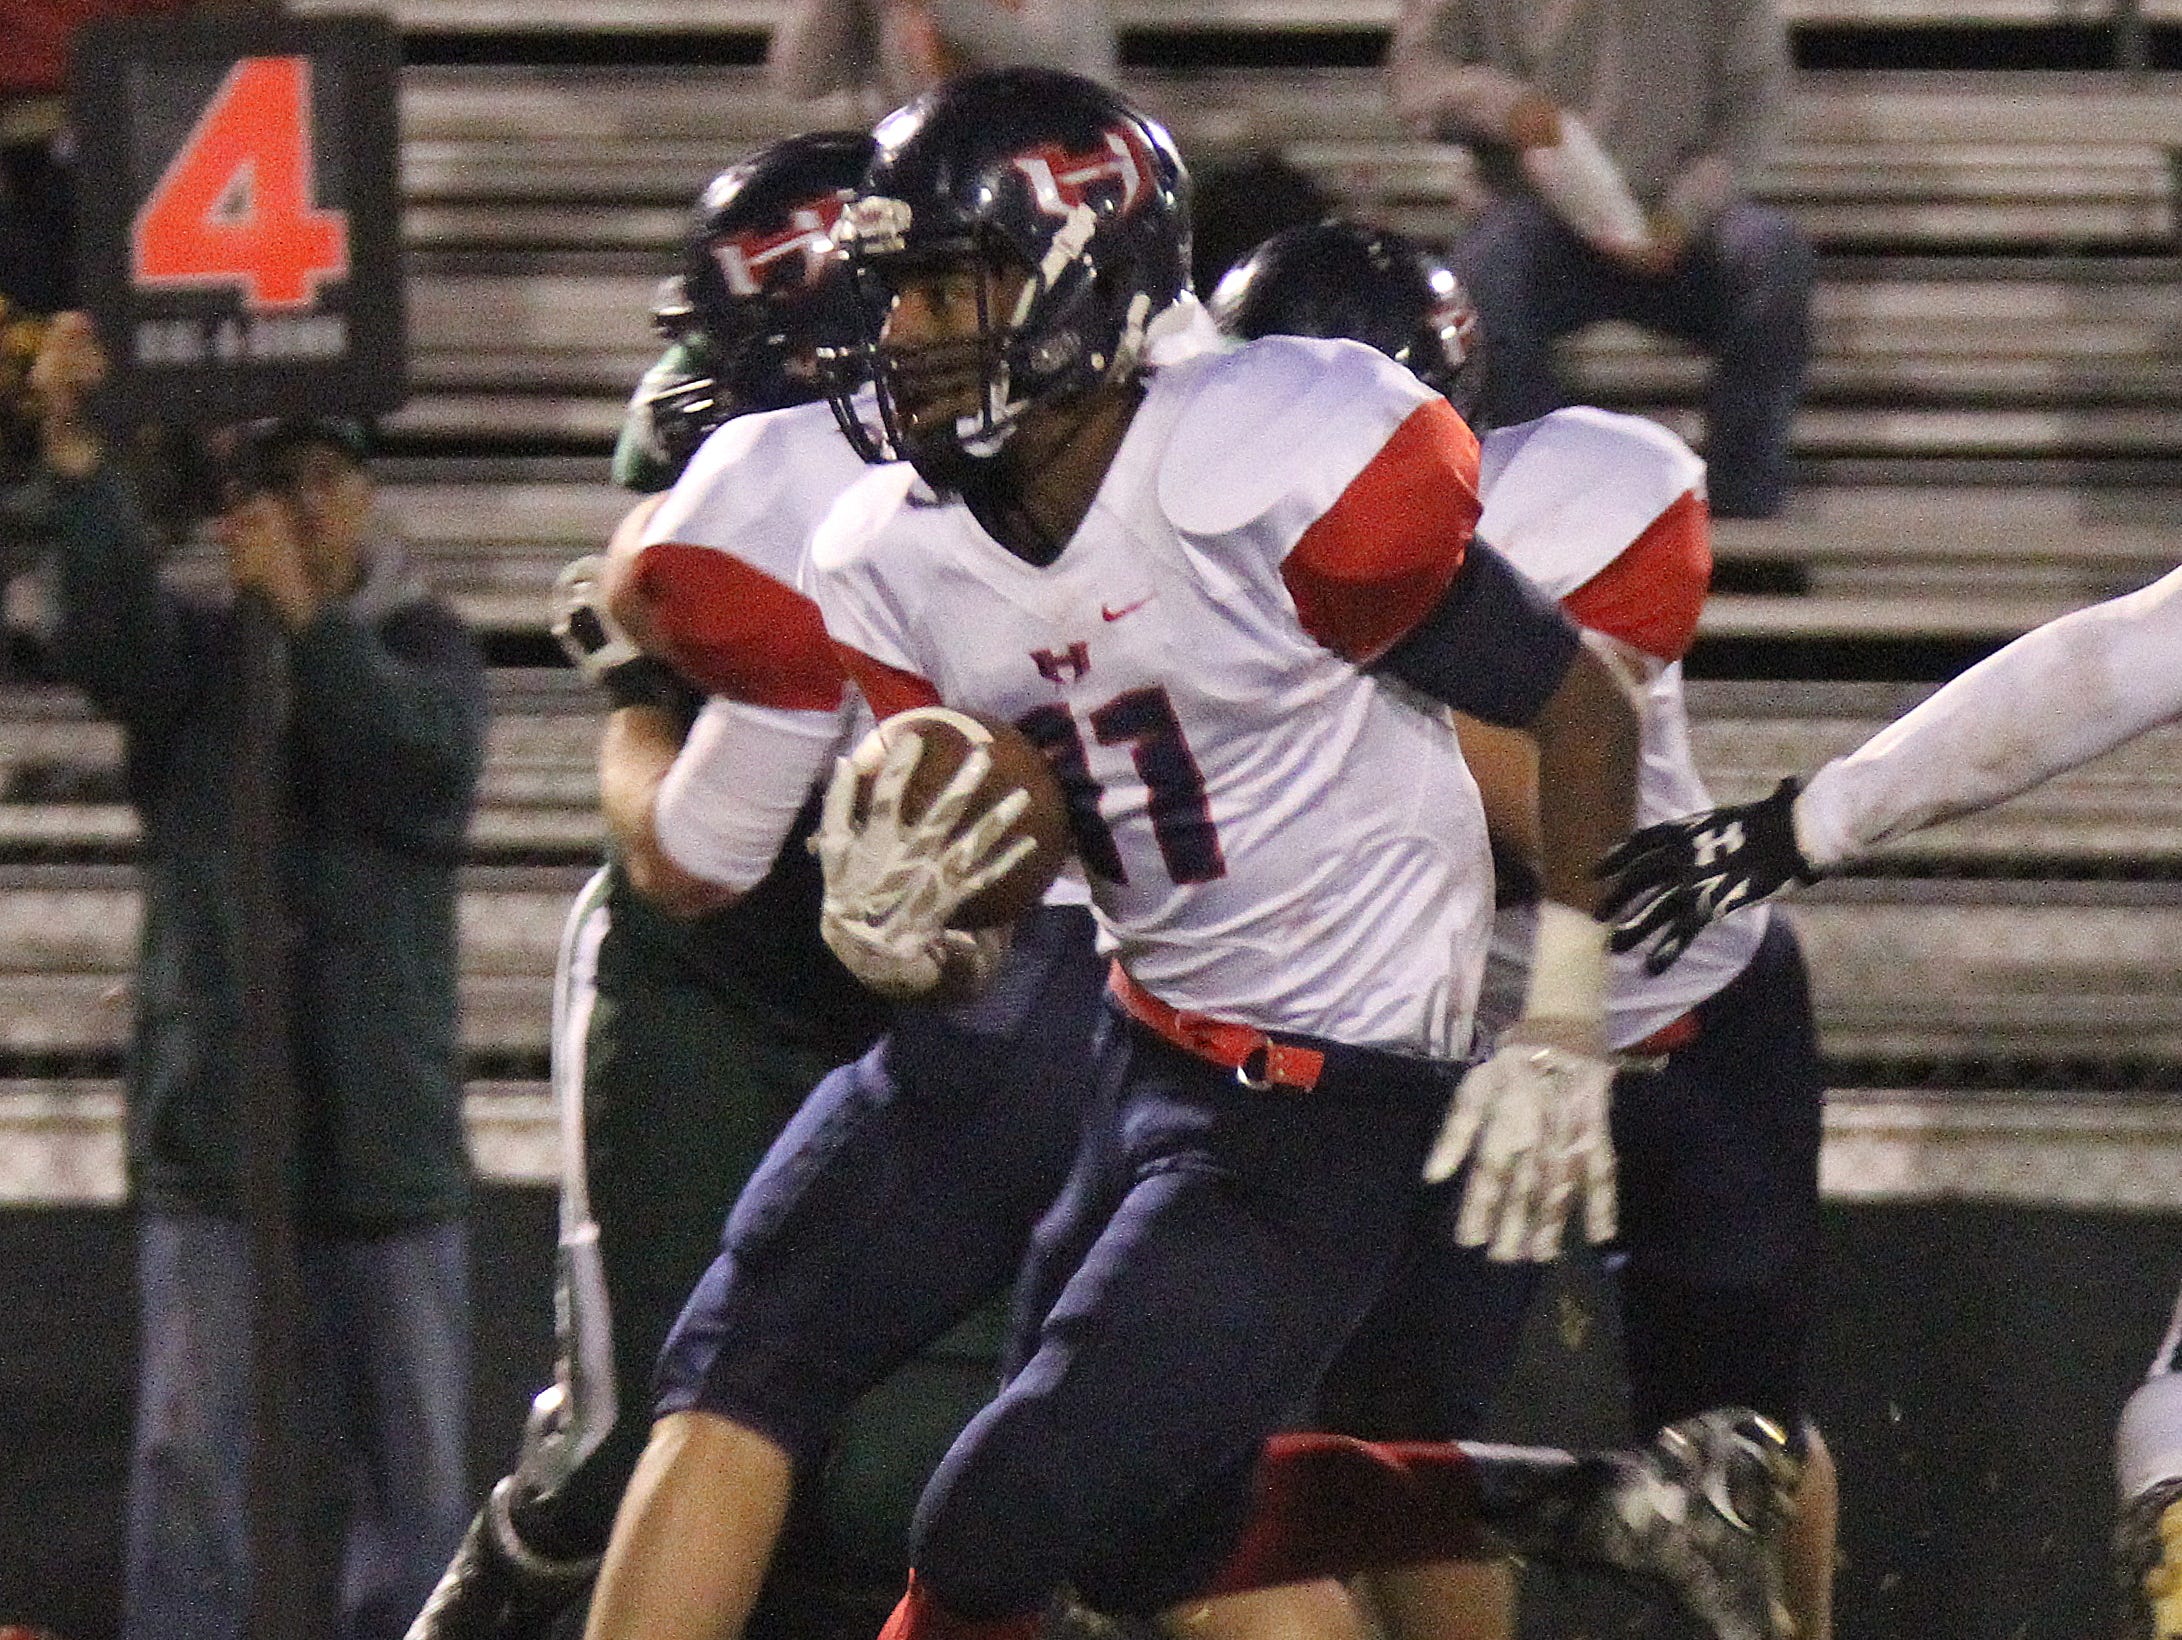 Thadd Baker led Heritage with 75 yards on 13 carries and three touchdowns against Greenbrier.